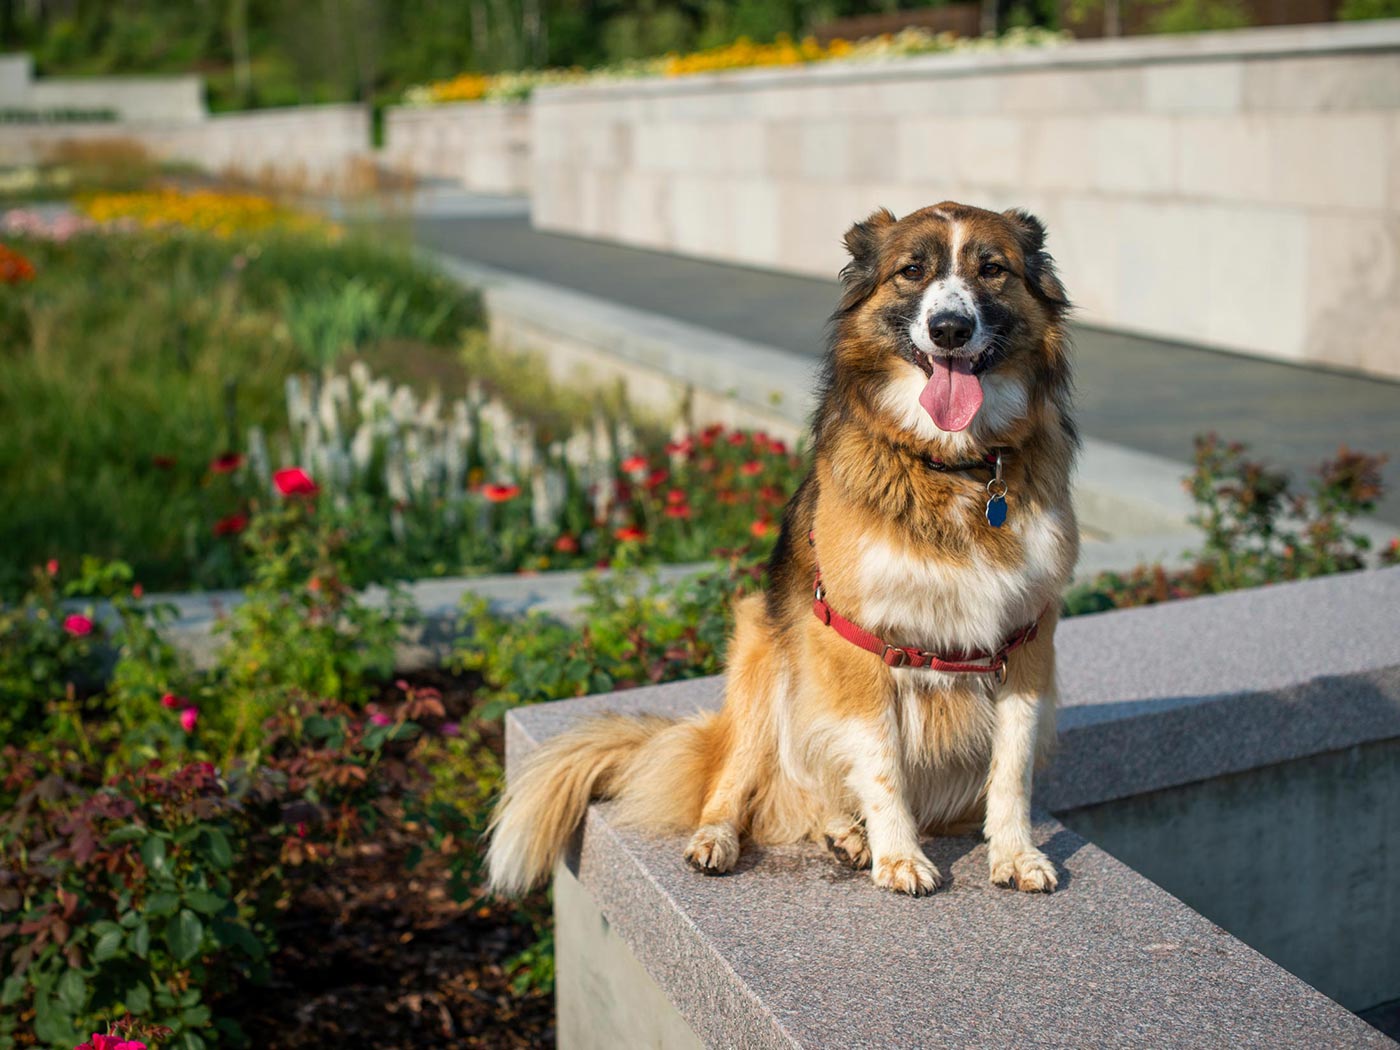 A border collie sits on a stone wall in the Aga Khan garden